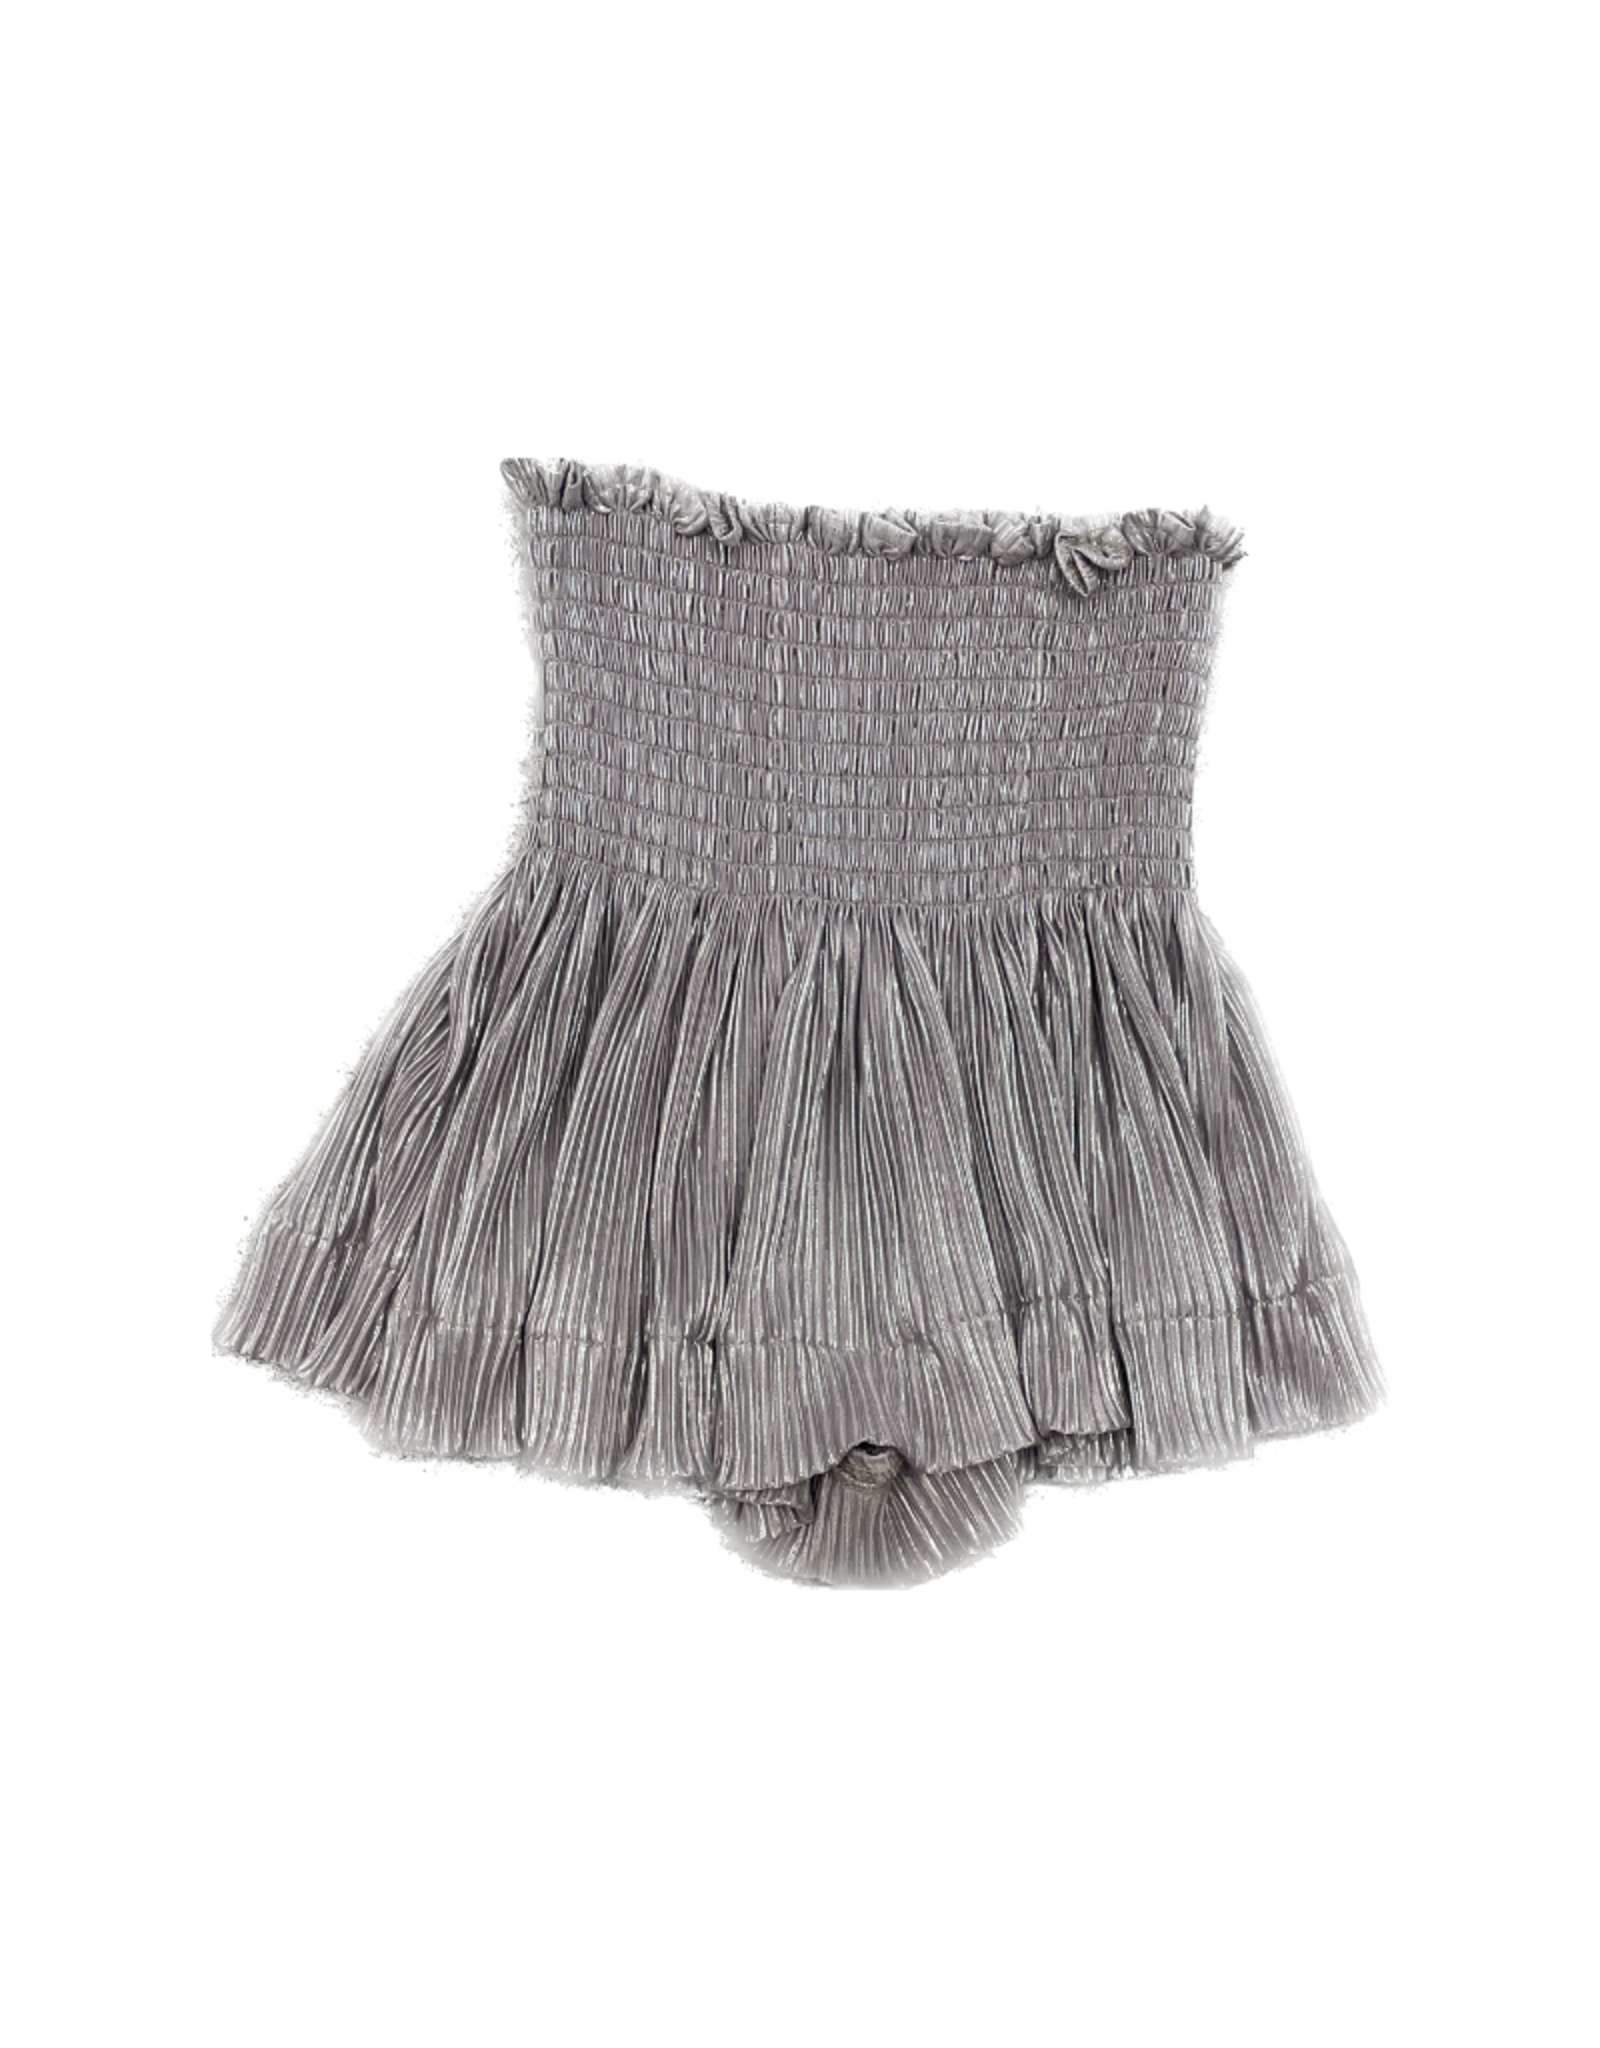 Queen of Sparkles Silver Pleated Swing Shorts